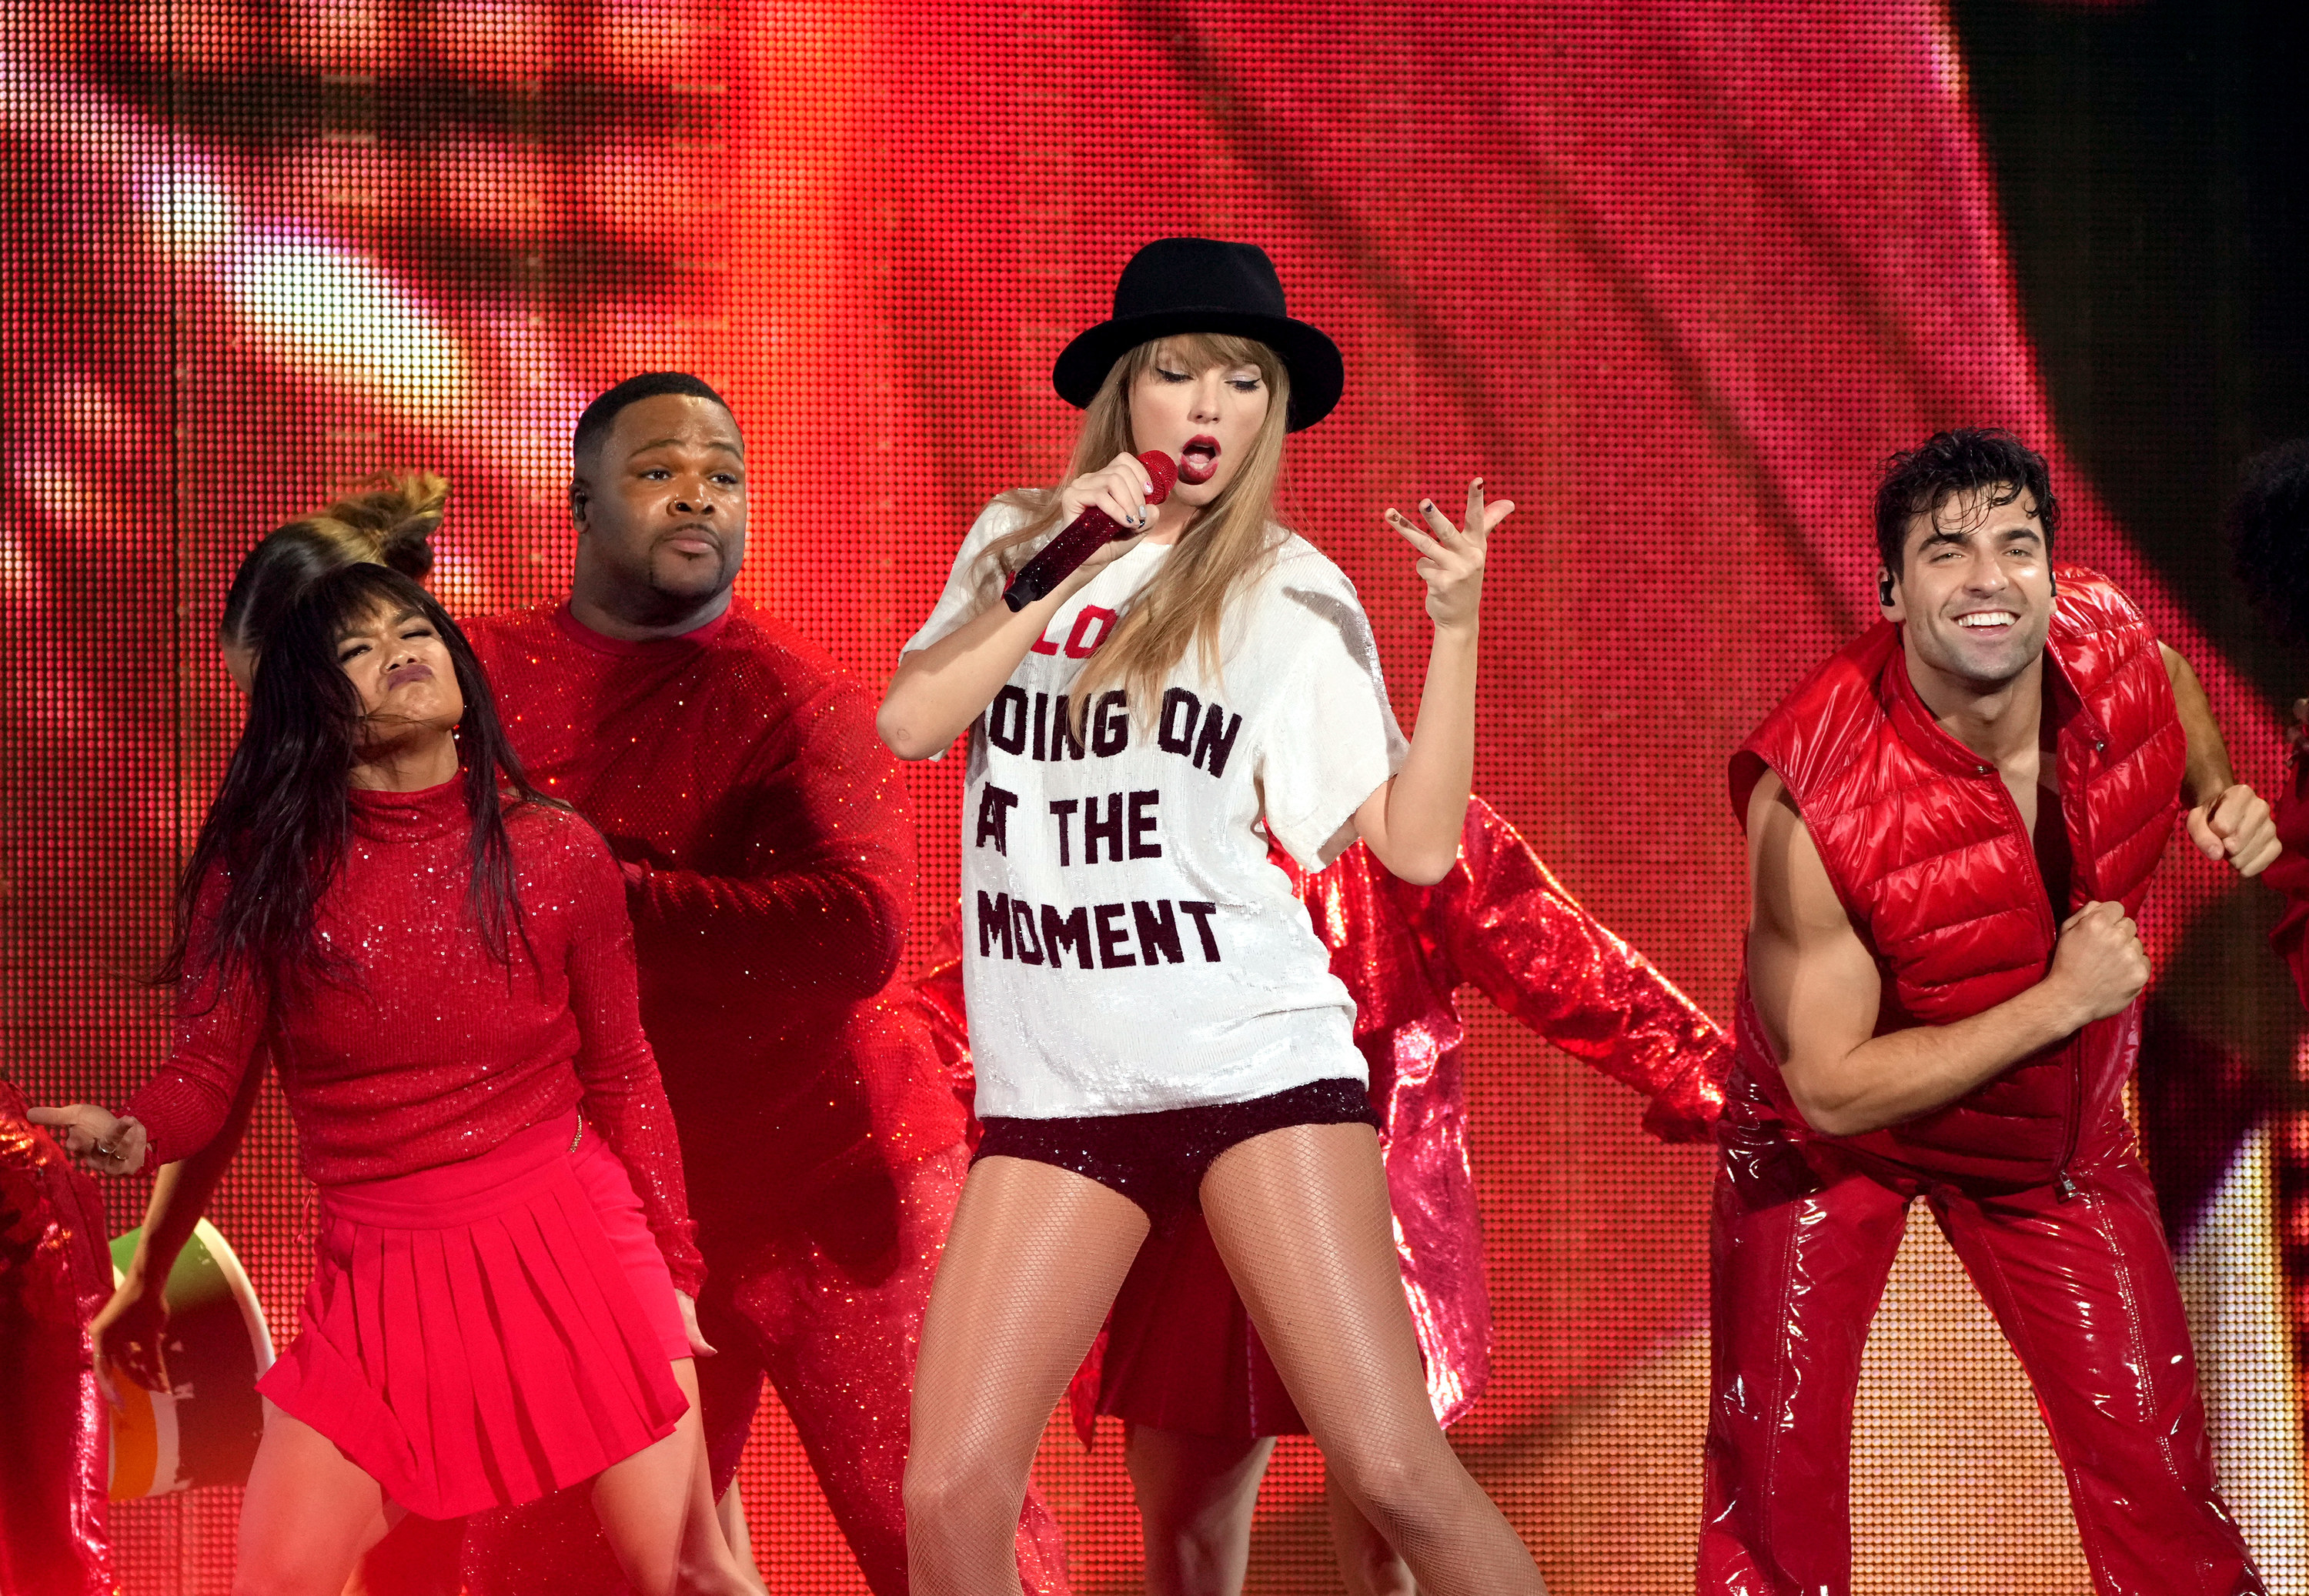 Taylor wearing her &quot;A Lot Going On At That Moment&quot; shirt